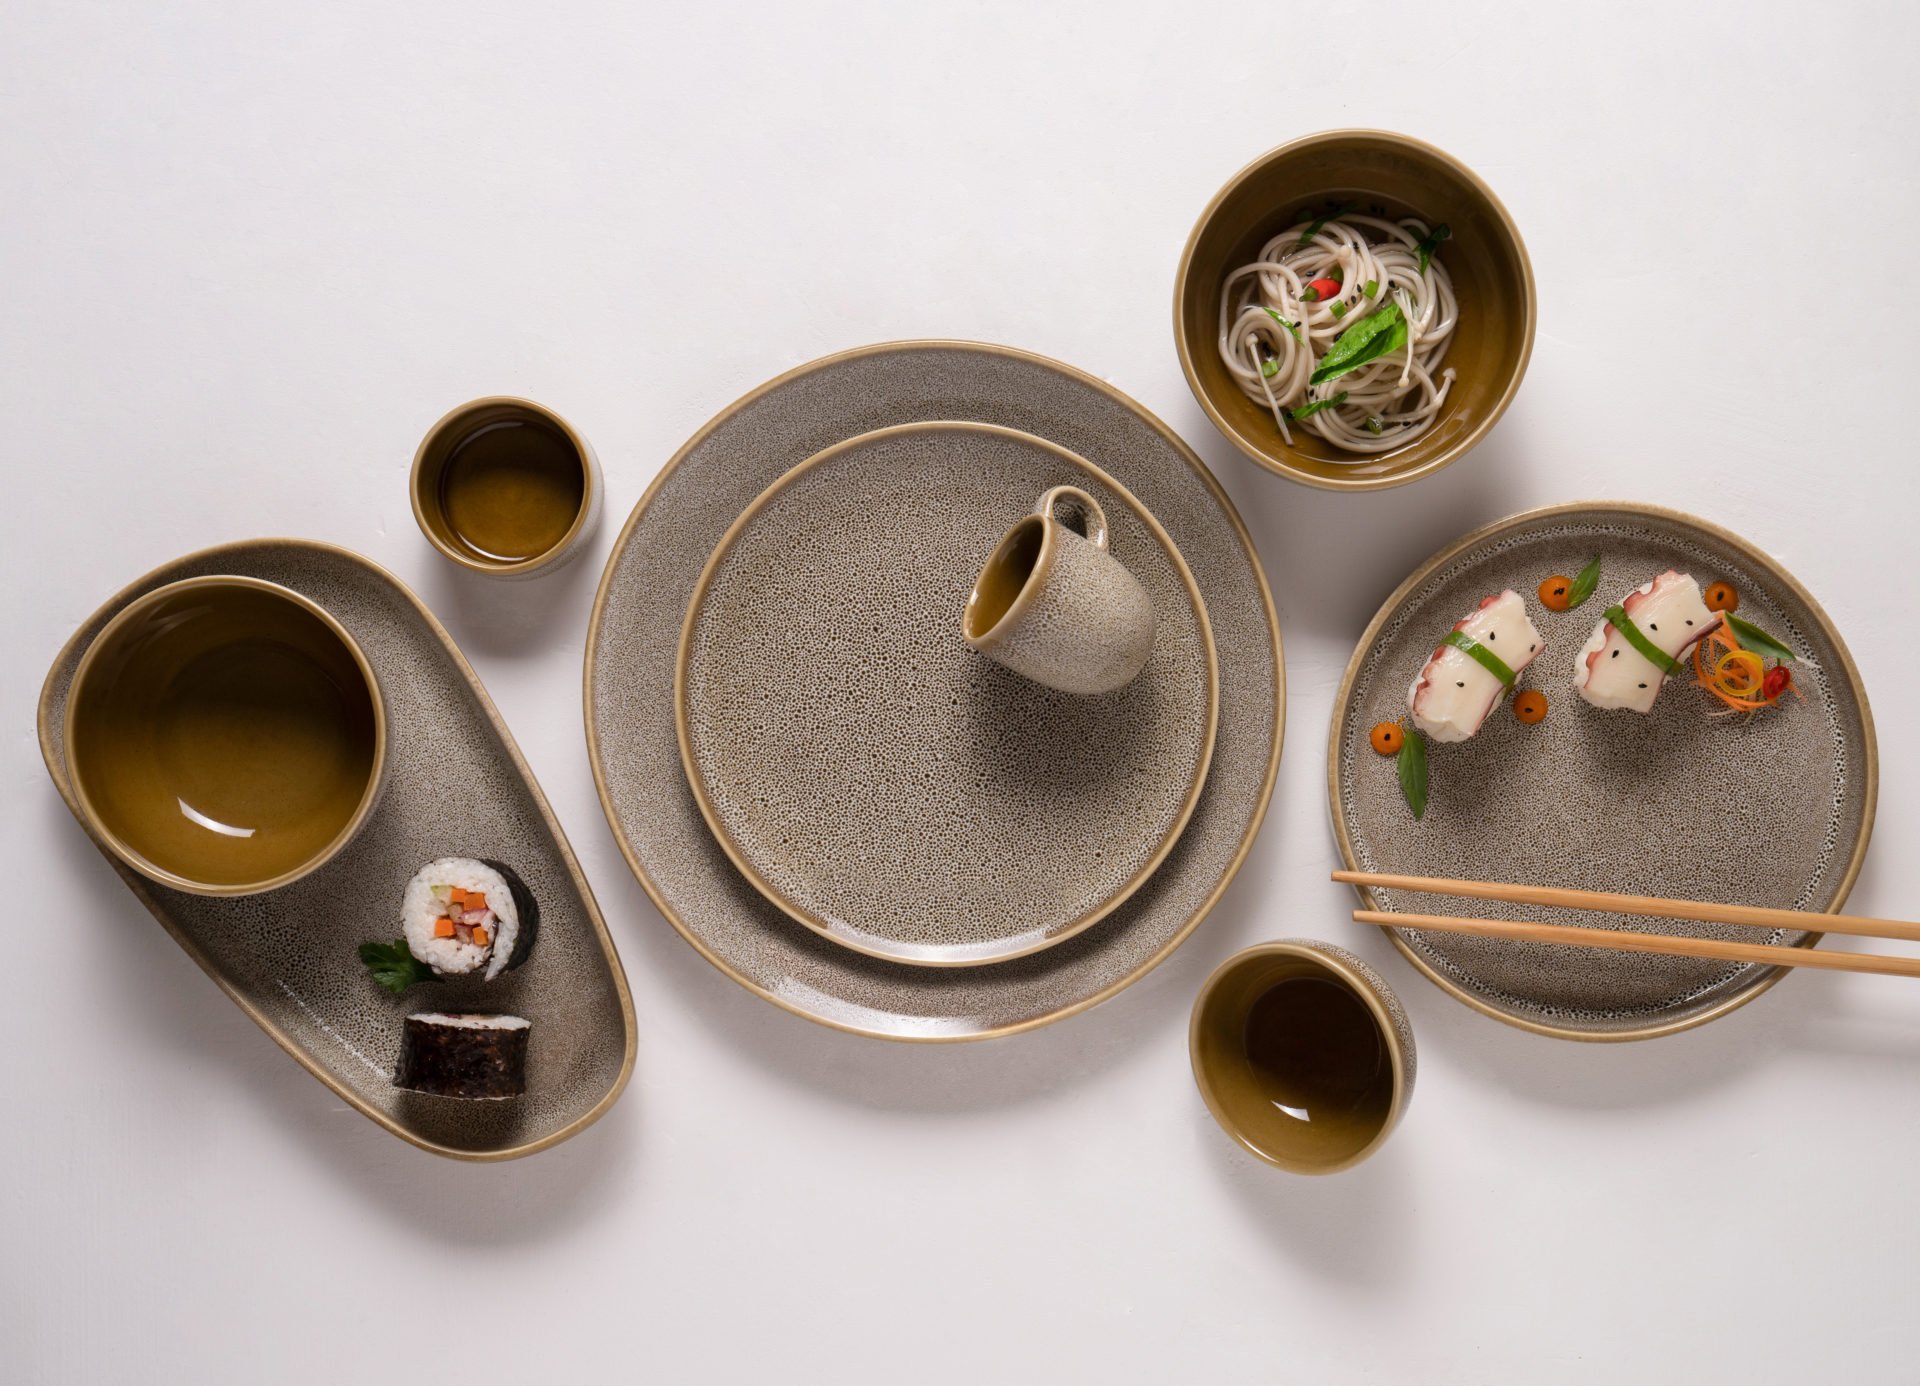 Worldchefs and Ariane Fine Porcelain Bring Excellence to the Table with New Global Partnership